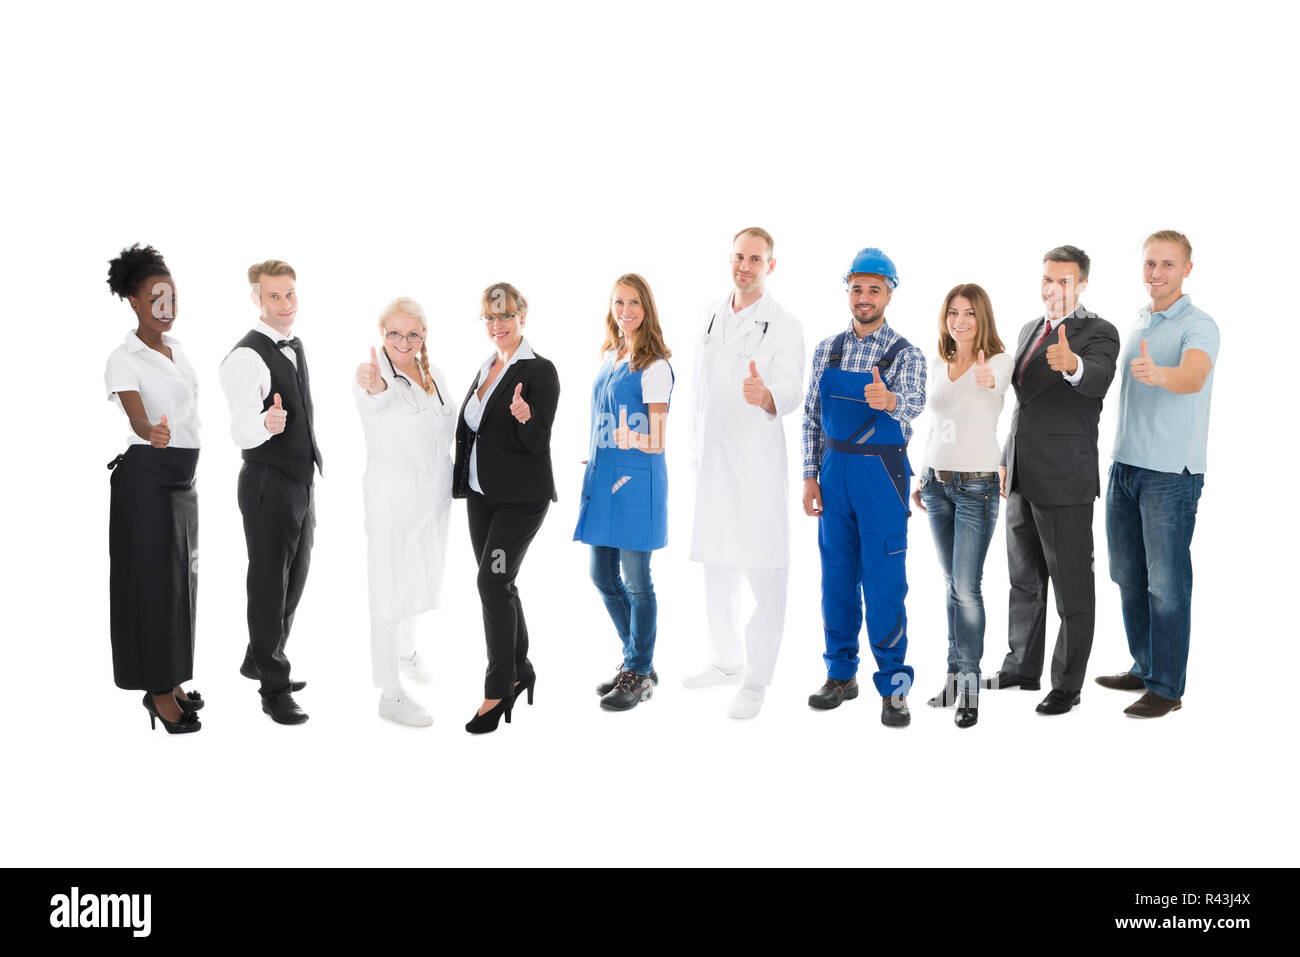 Portrait Of People With Various Occupations Stock Photo